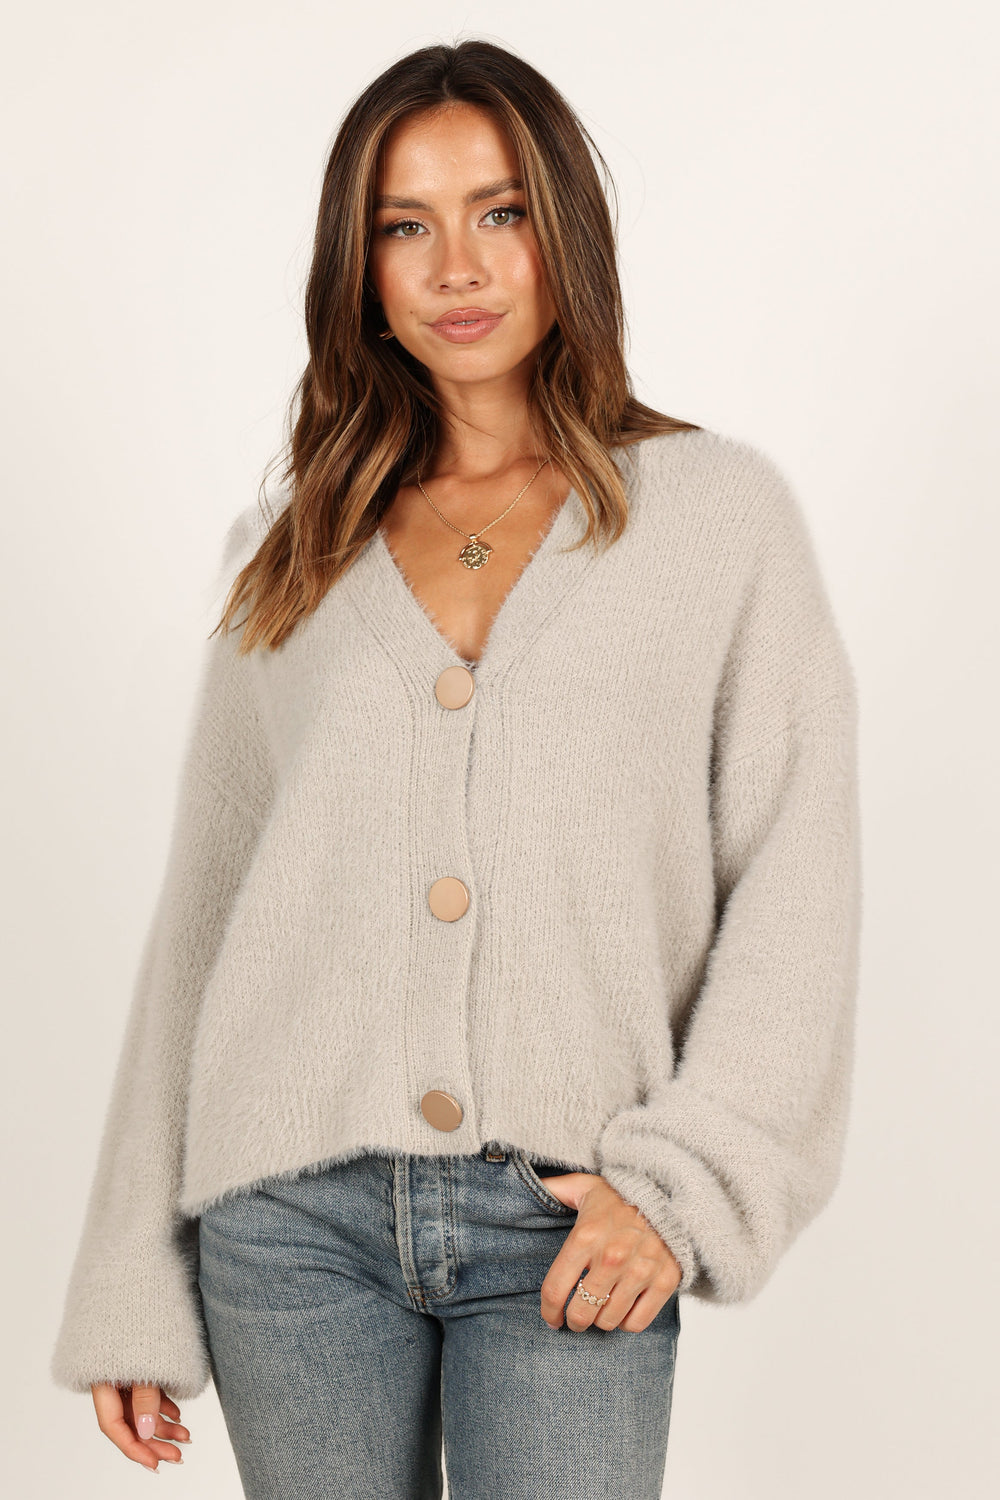 Petal and Pup USA Knitwear Willow Fuzzy Large Button Cardigan - Light Grey